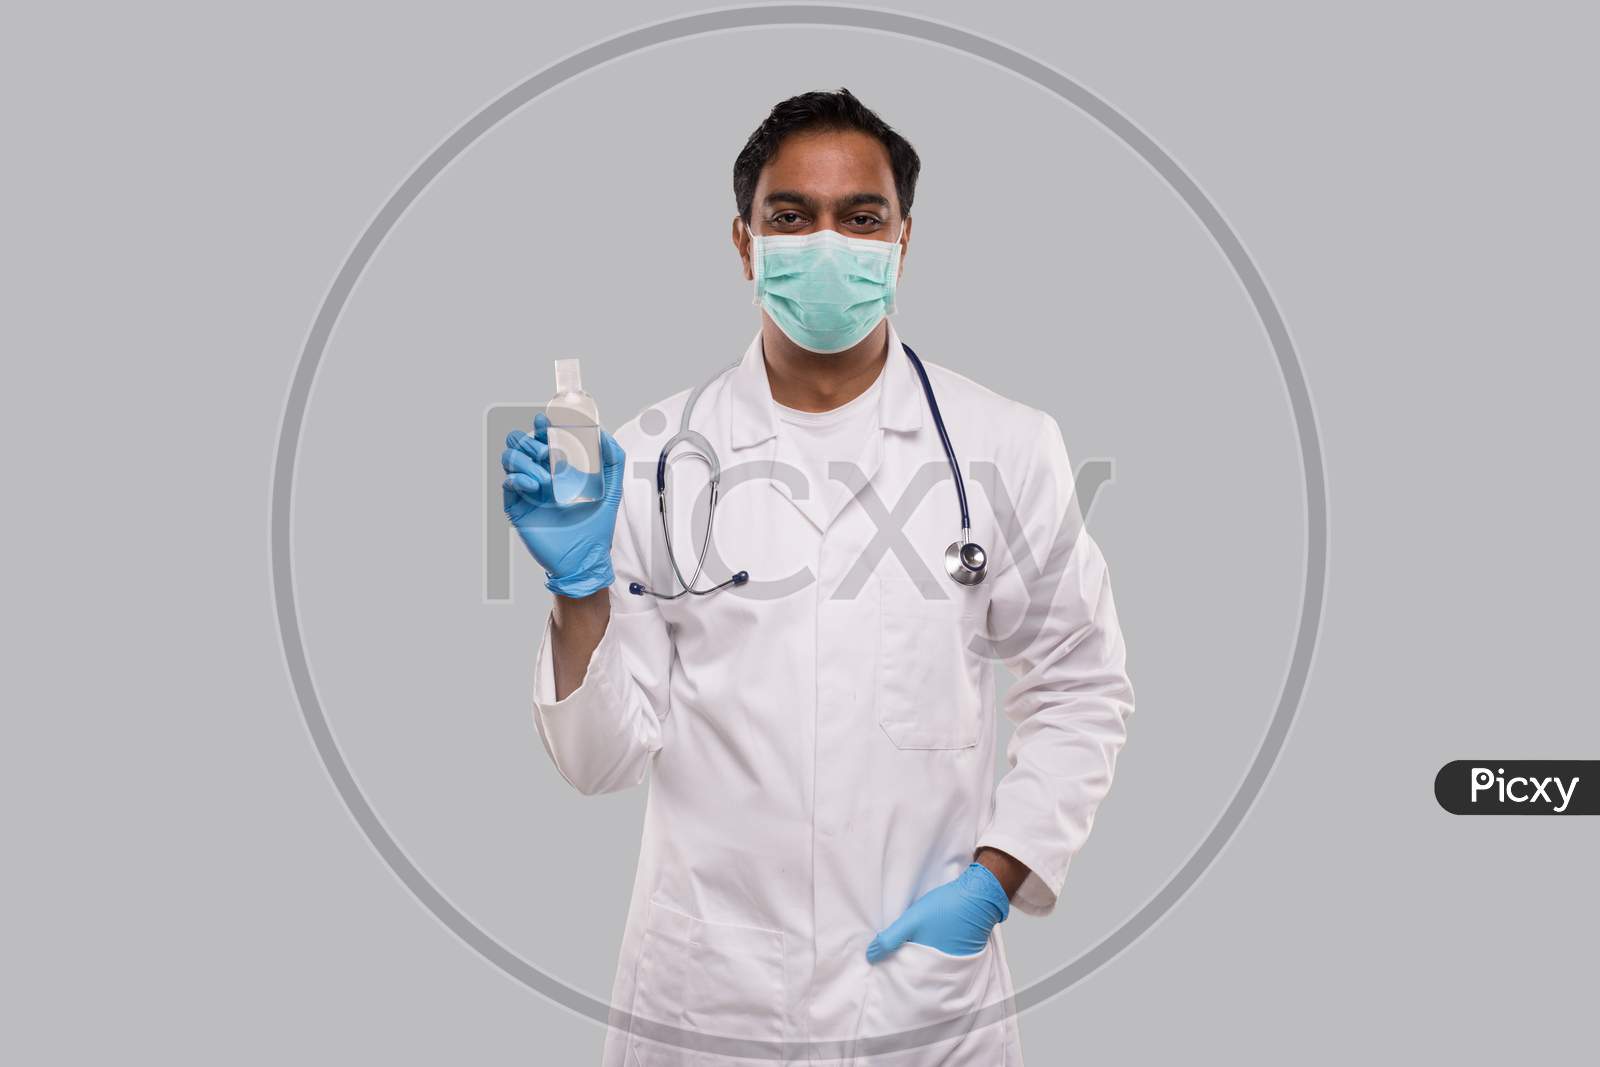 Indian Man Doctor Holding Hands Sanitizer Wearing Medical Mask And Gloves. Hands Wash Antiseptic. Corona Virus Concept. Isolated